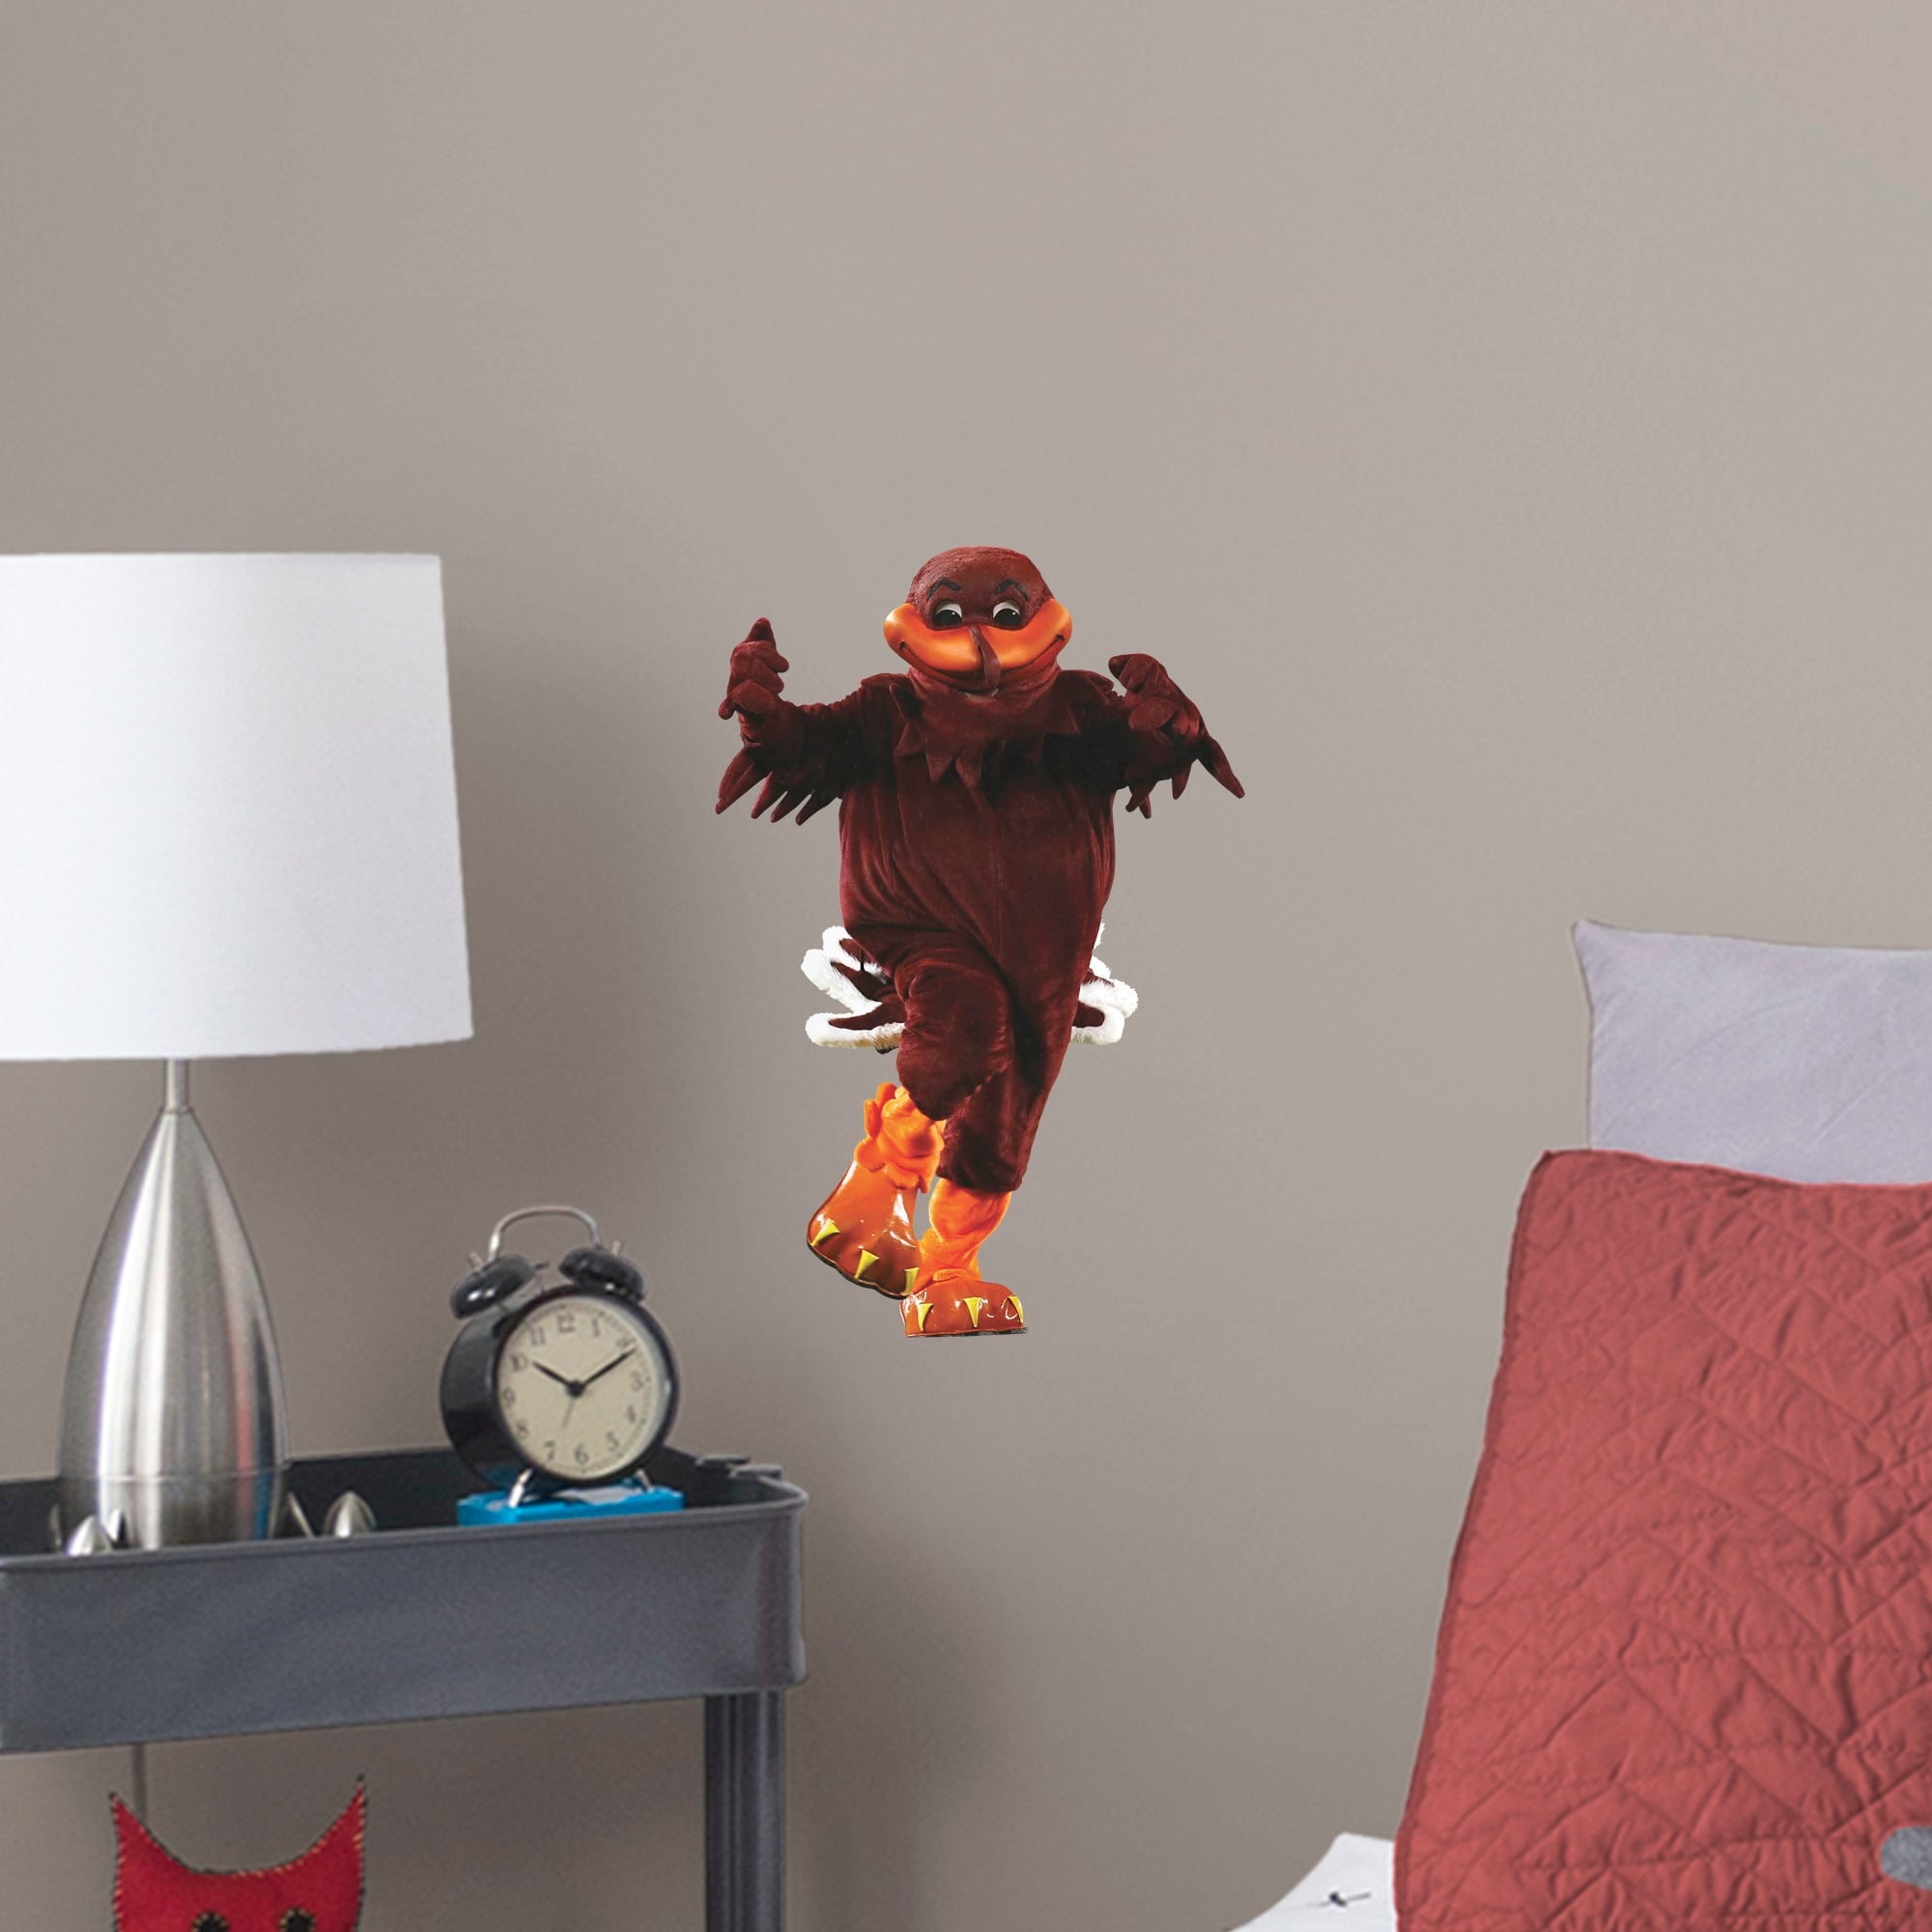 Virginia Tech Hokies: Hokiebird Mascot - Officially Licensed Removable Wall Decal Large by Fathead | Vinyl